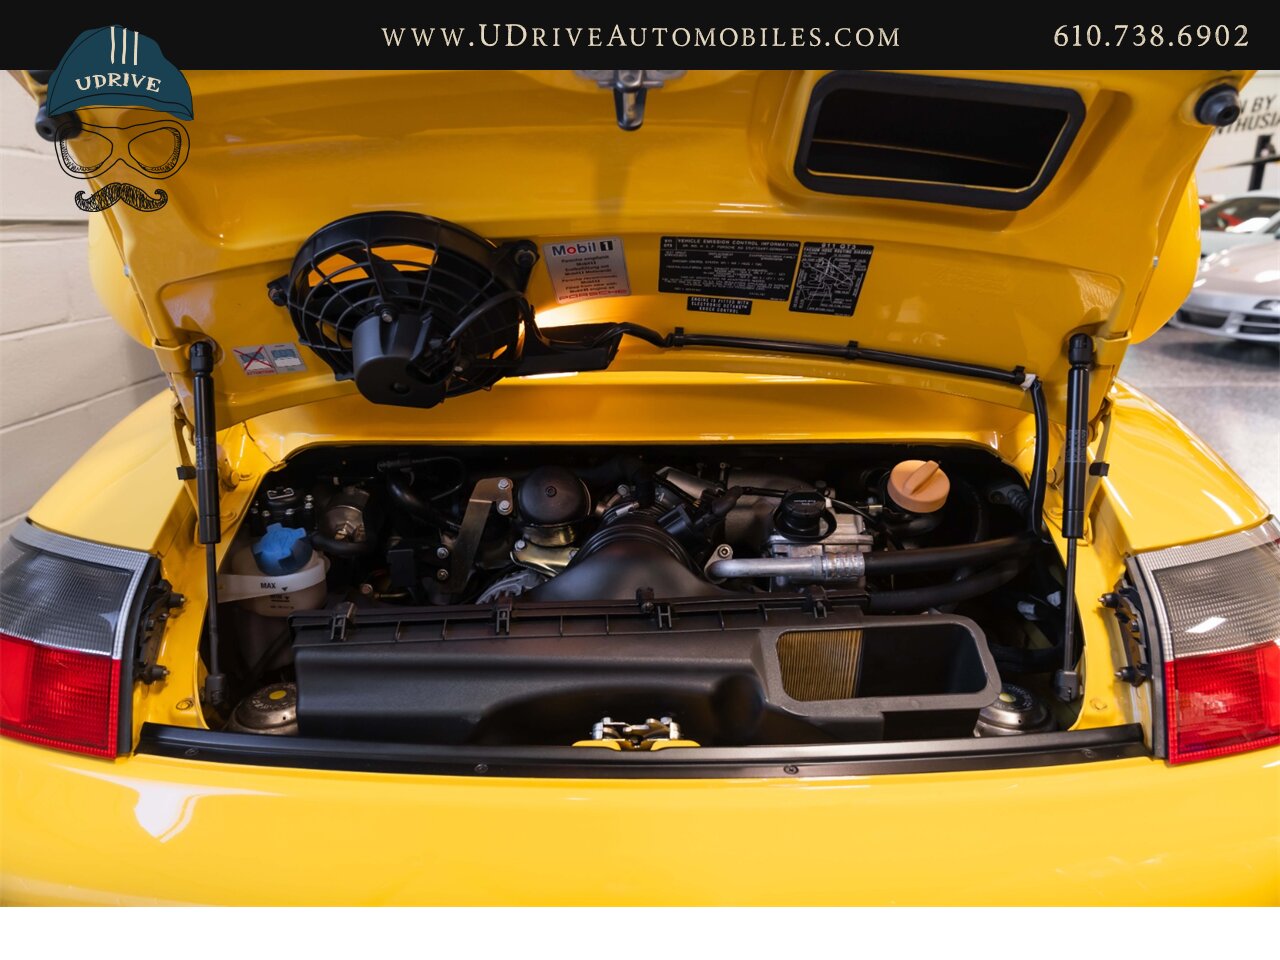 2005 Porsche 911 GT3 996 Speed Yellow Sport Seats Pntd Hardbacks  Pntd Console Deviating Stitch Yellow Accents Throughout - Photo 49 - West Chester, PA 19382